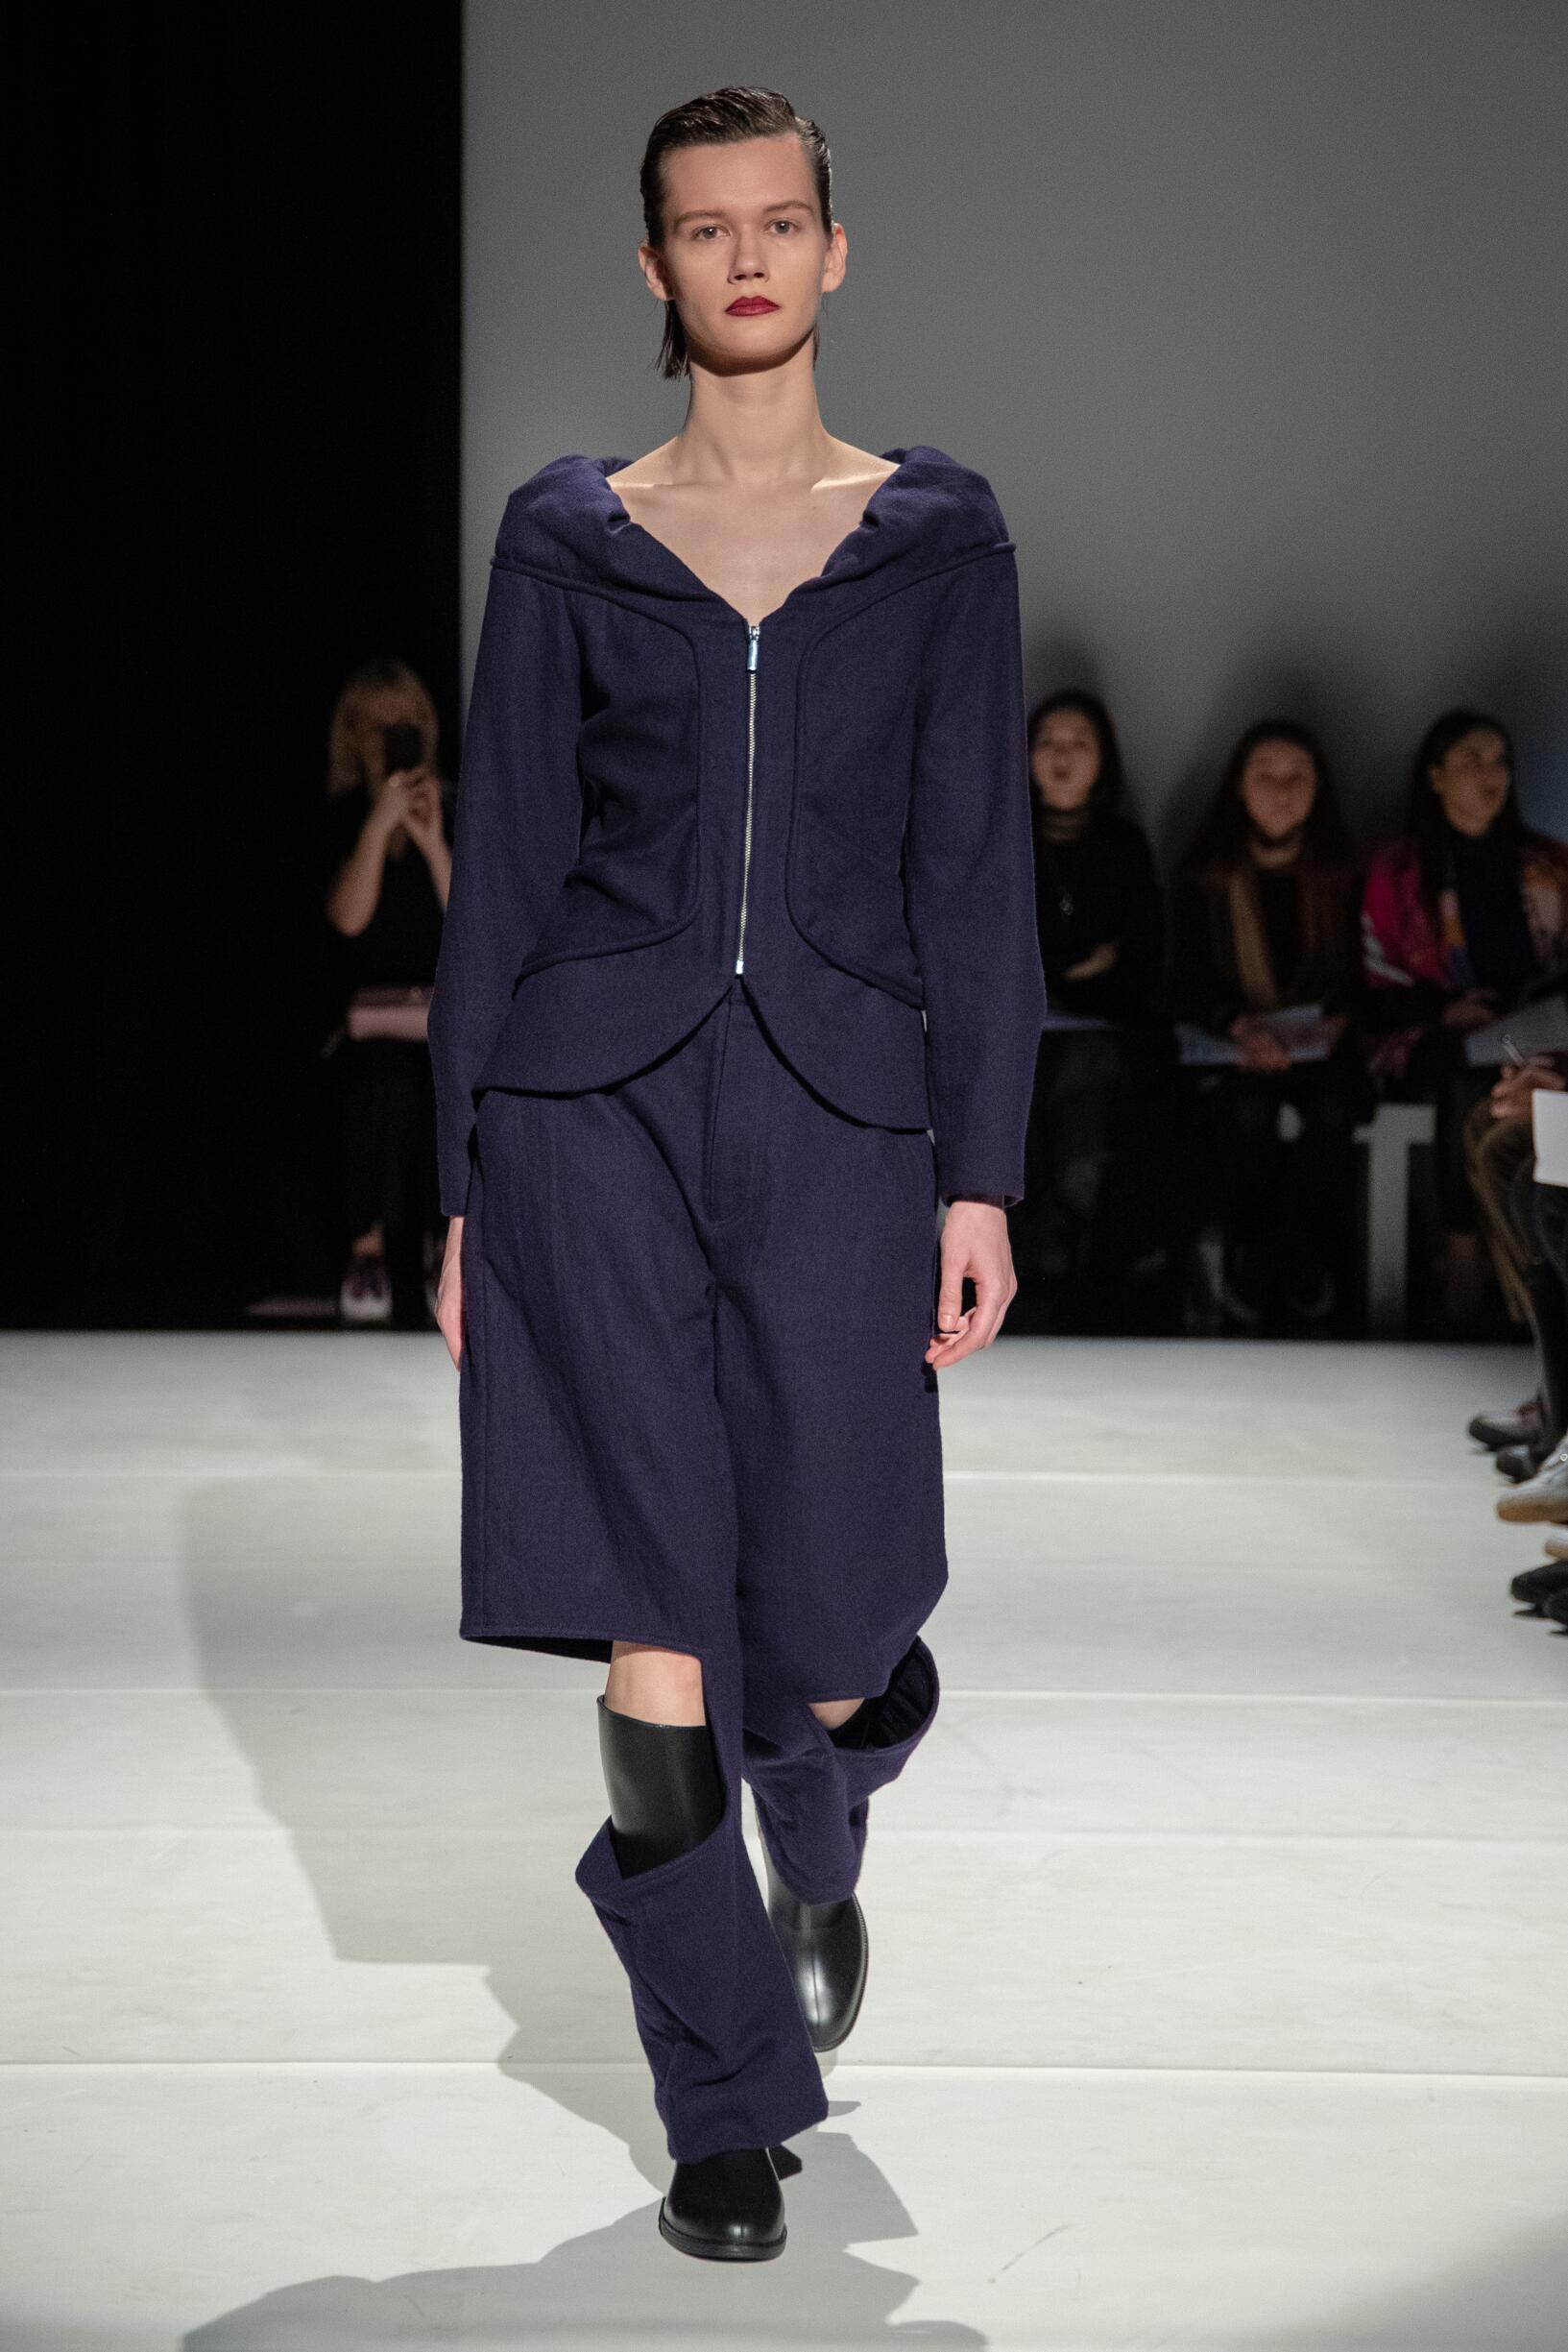 CHALAYAN FALL WINTER 2019 WOMEN'S COLLECTION | The Skinny Beep